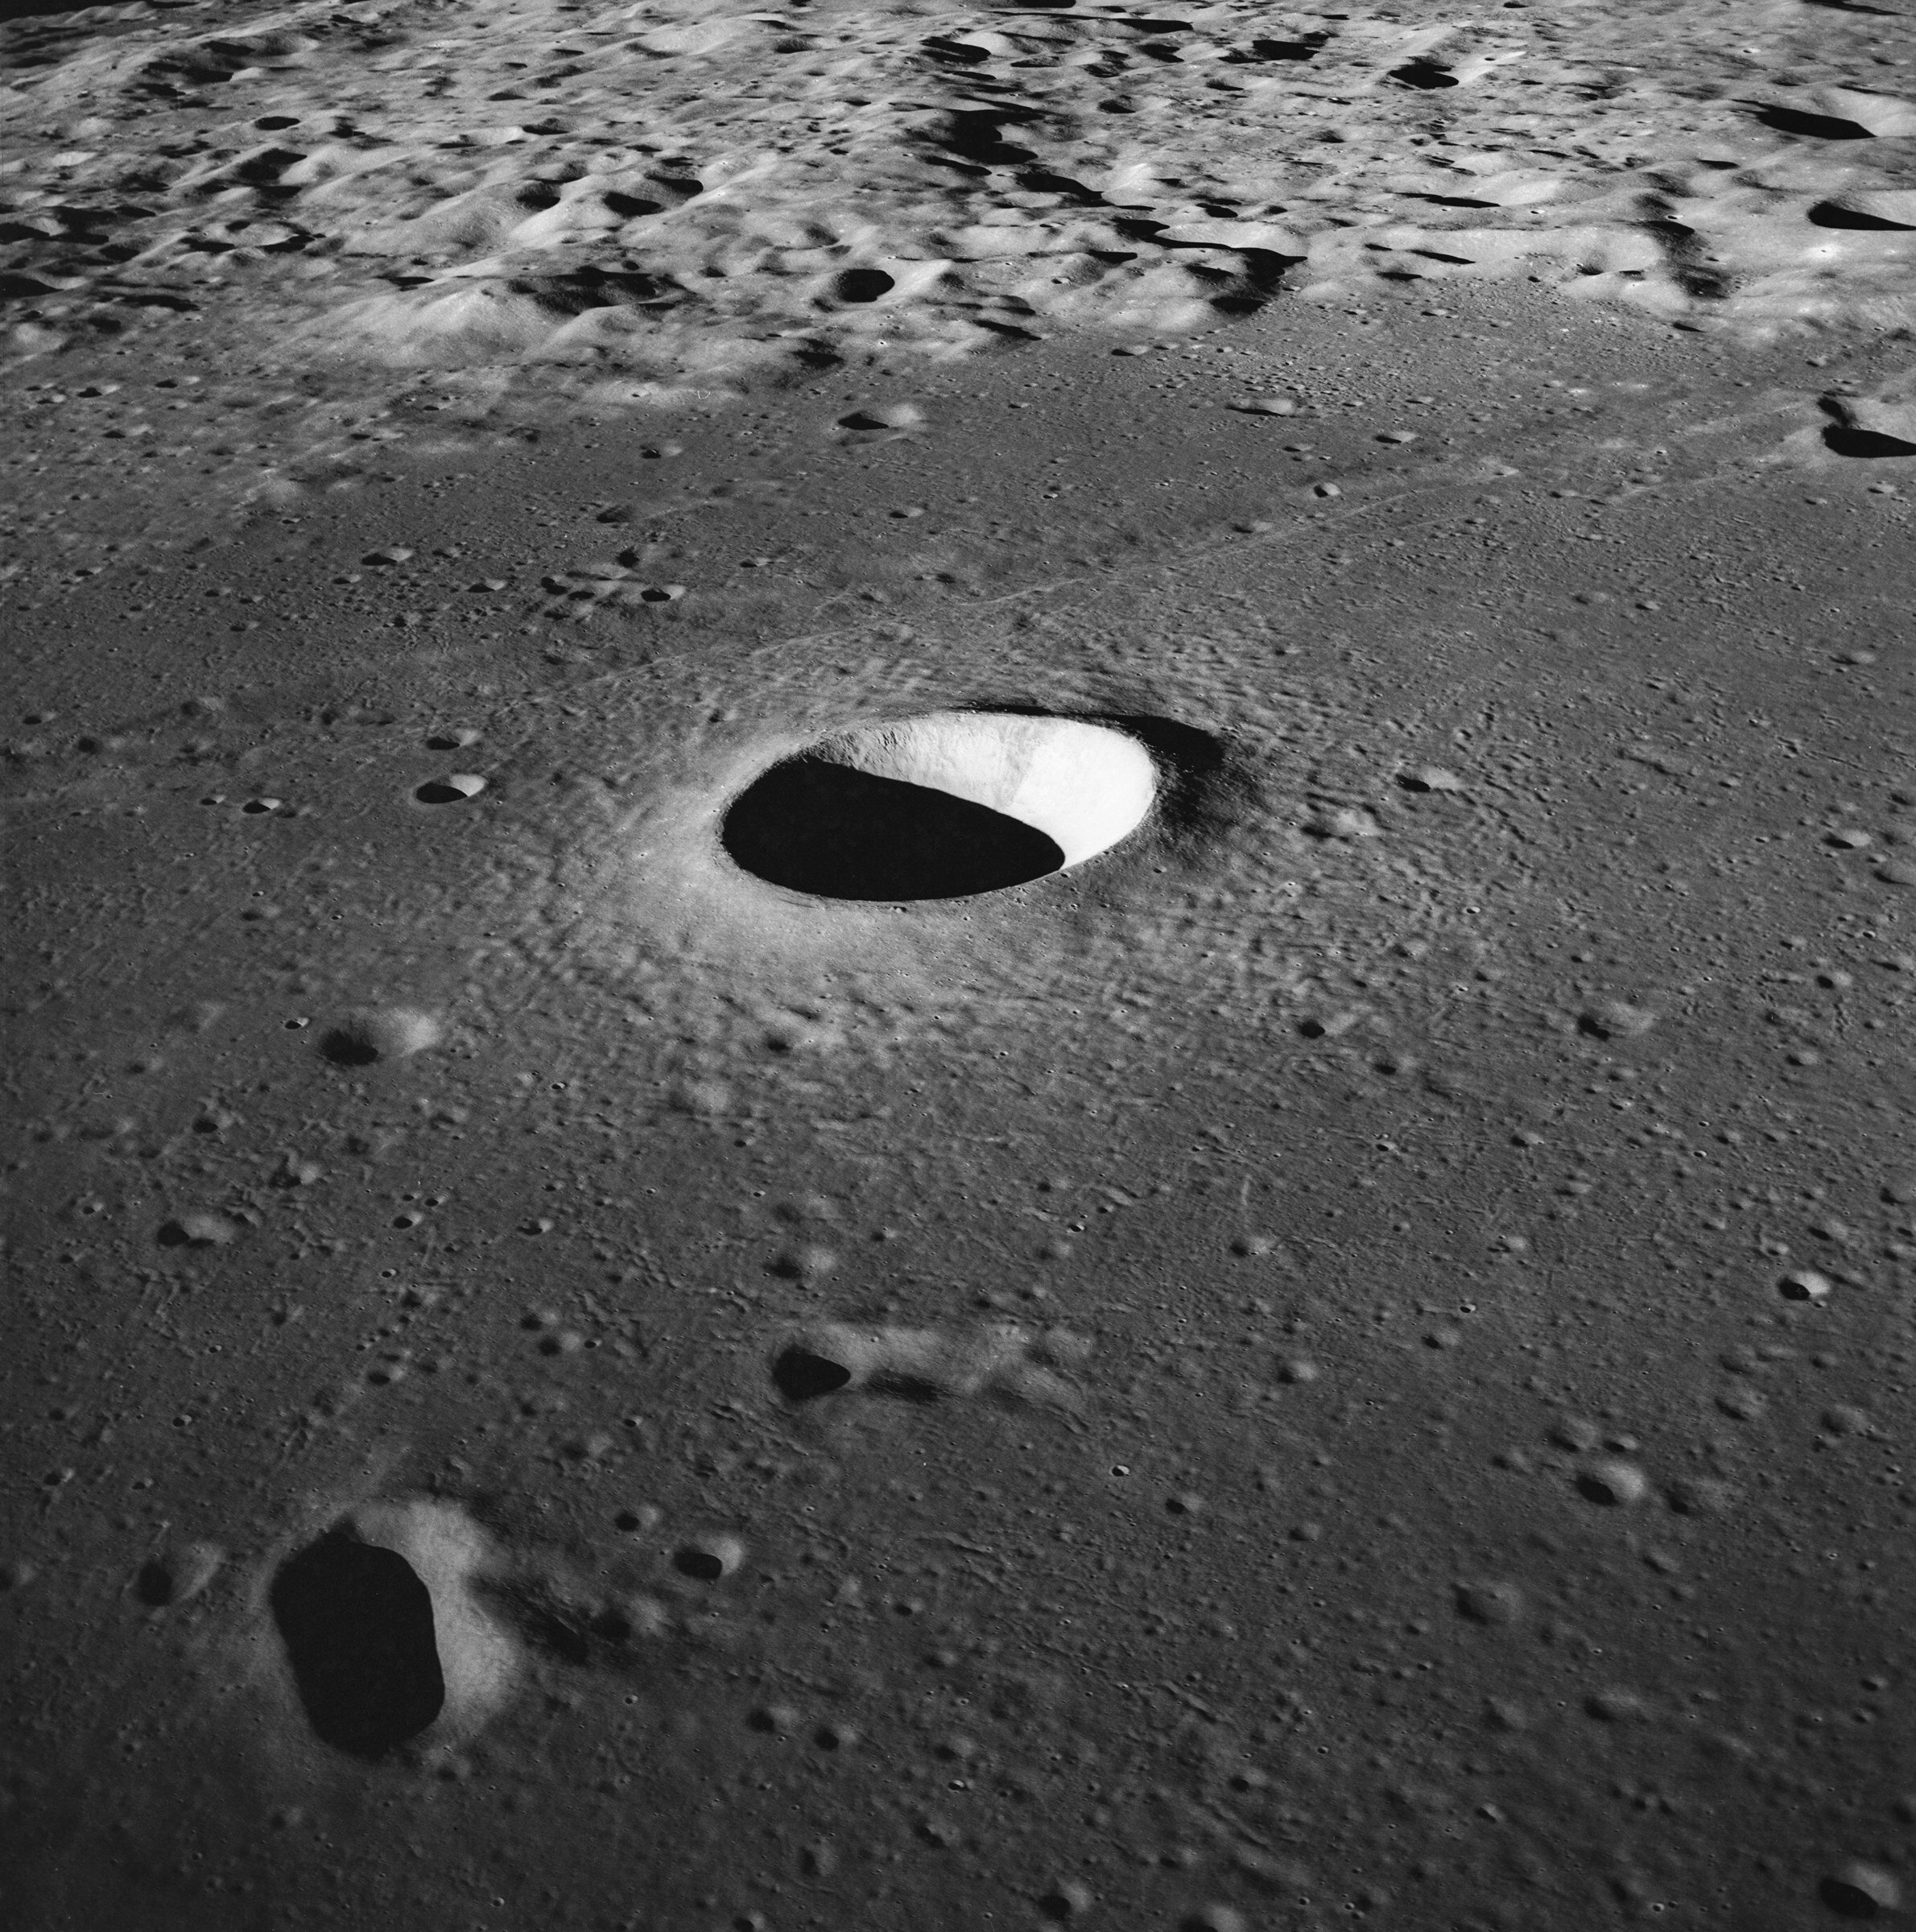 Using AI to count and map craters on the Moon